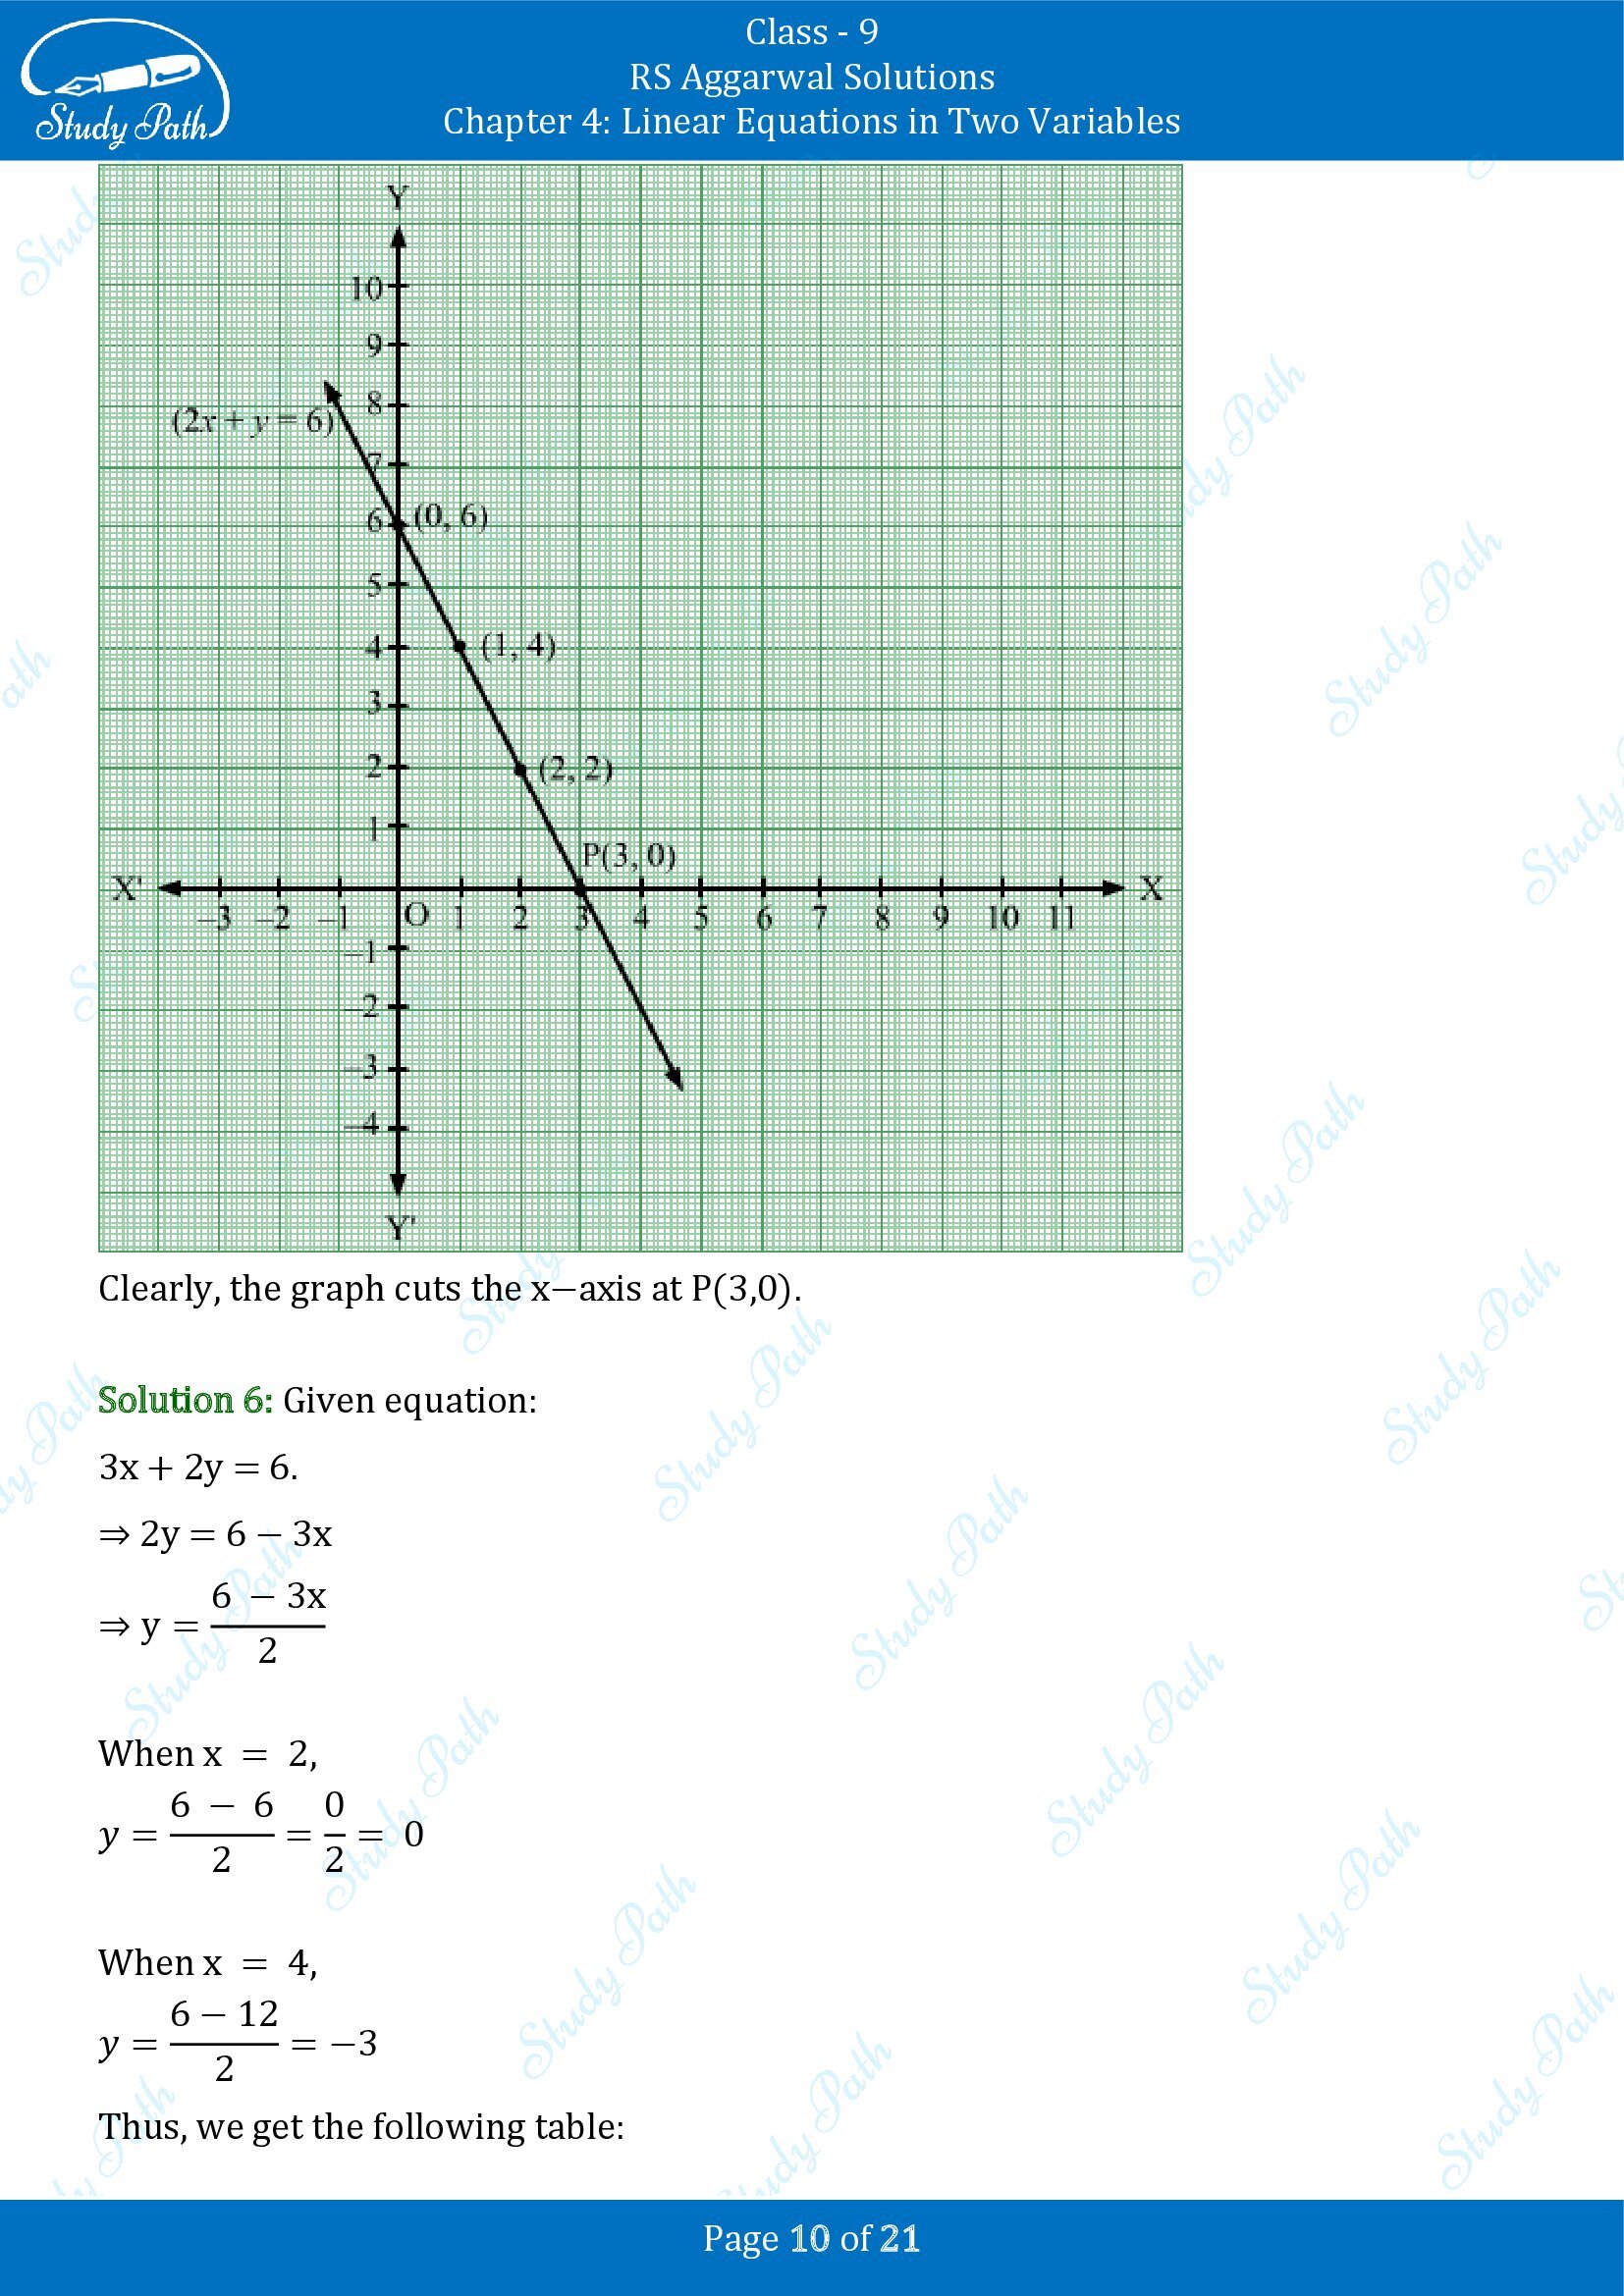 RS Aggarwal Solutions Class 9 Chapter 4 Linear Equations in Two Variables Exercise 4B 00010